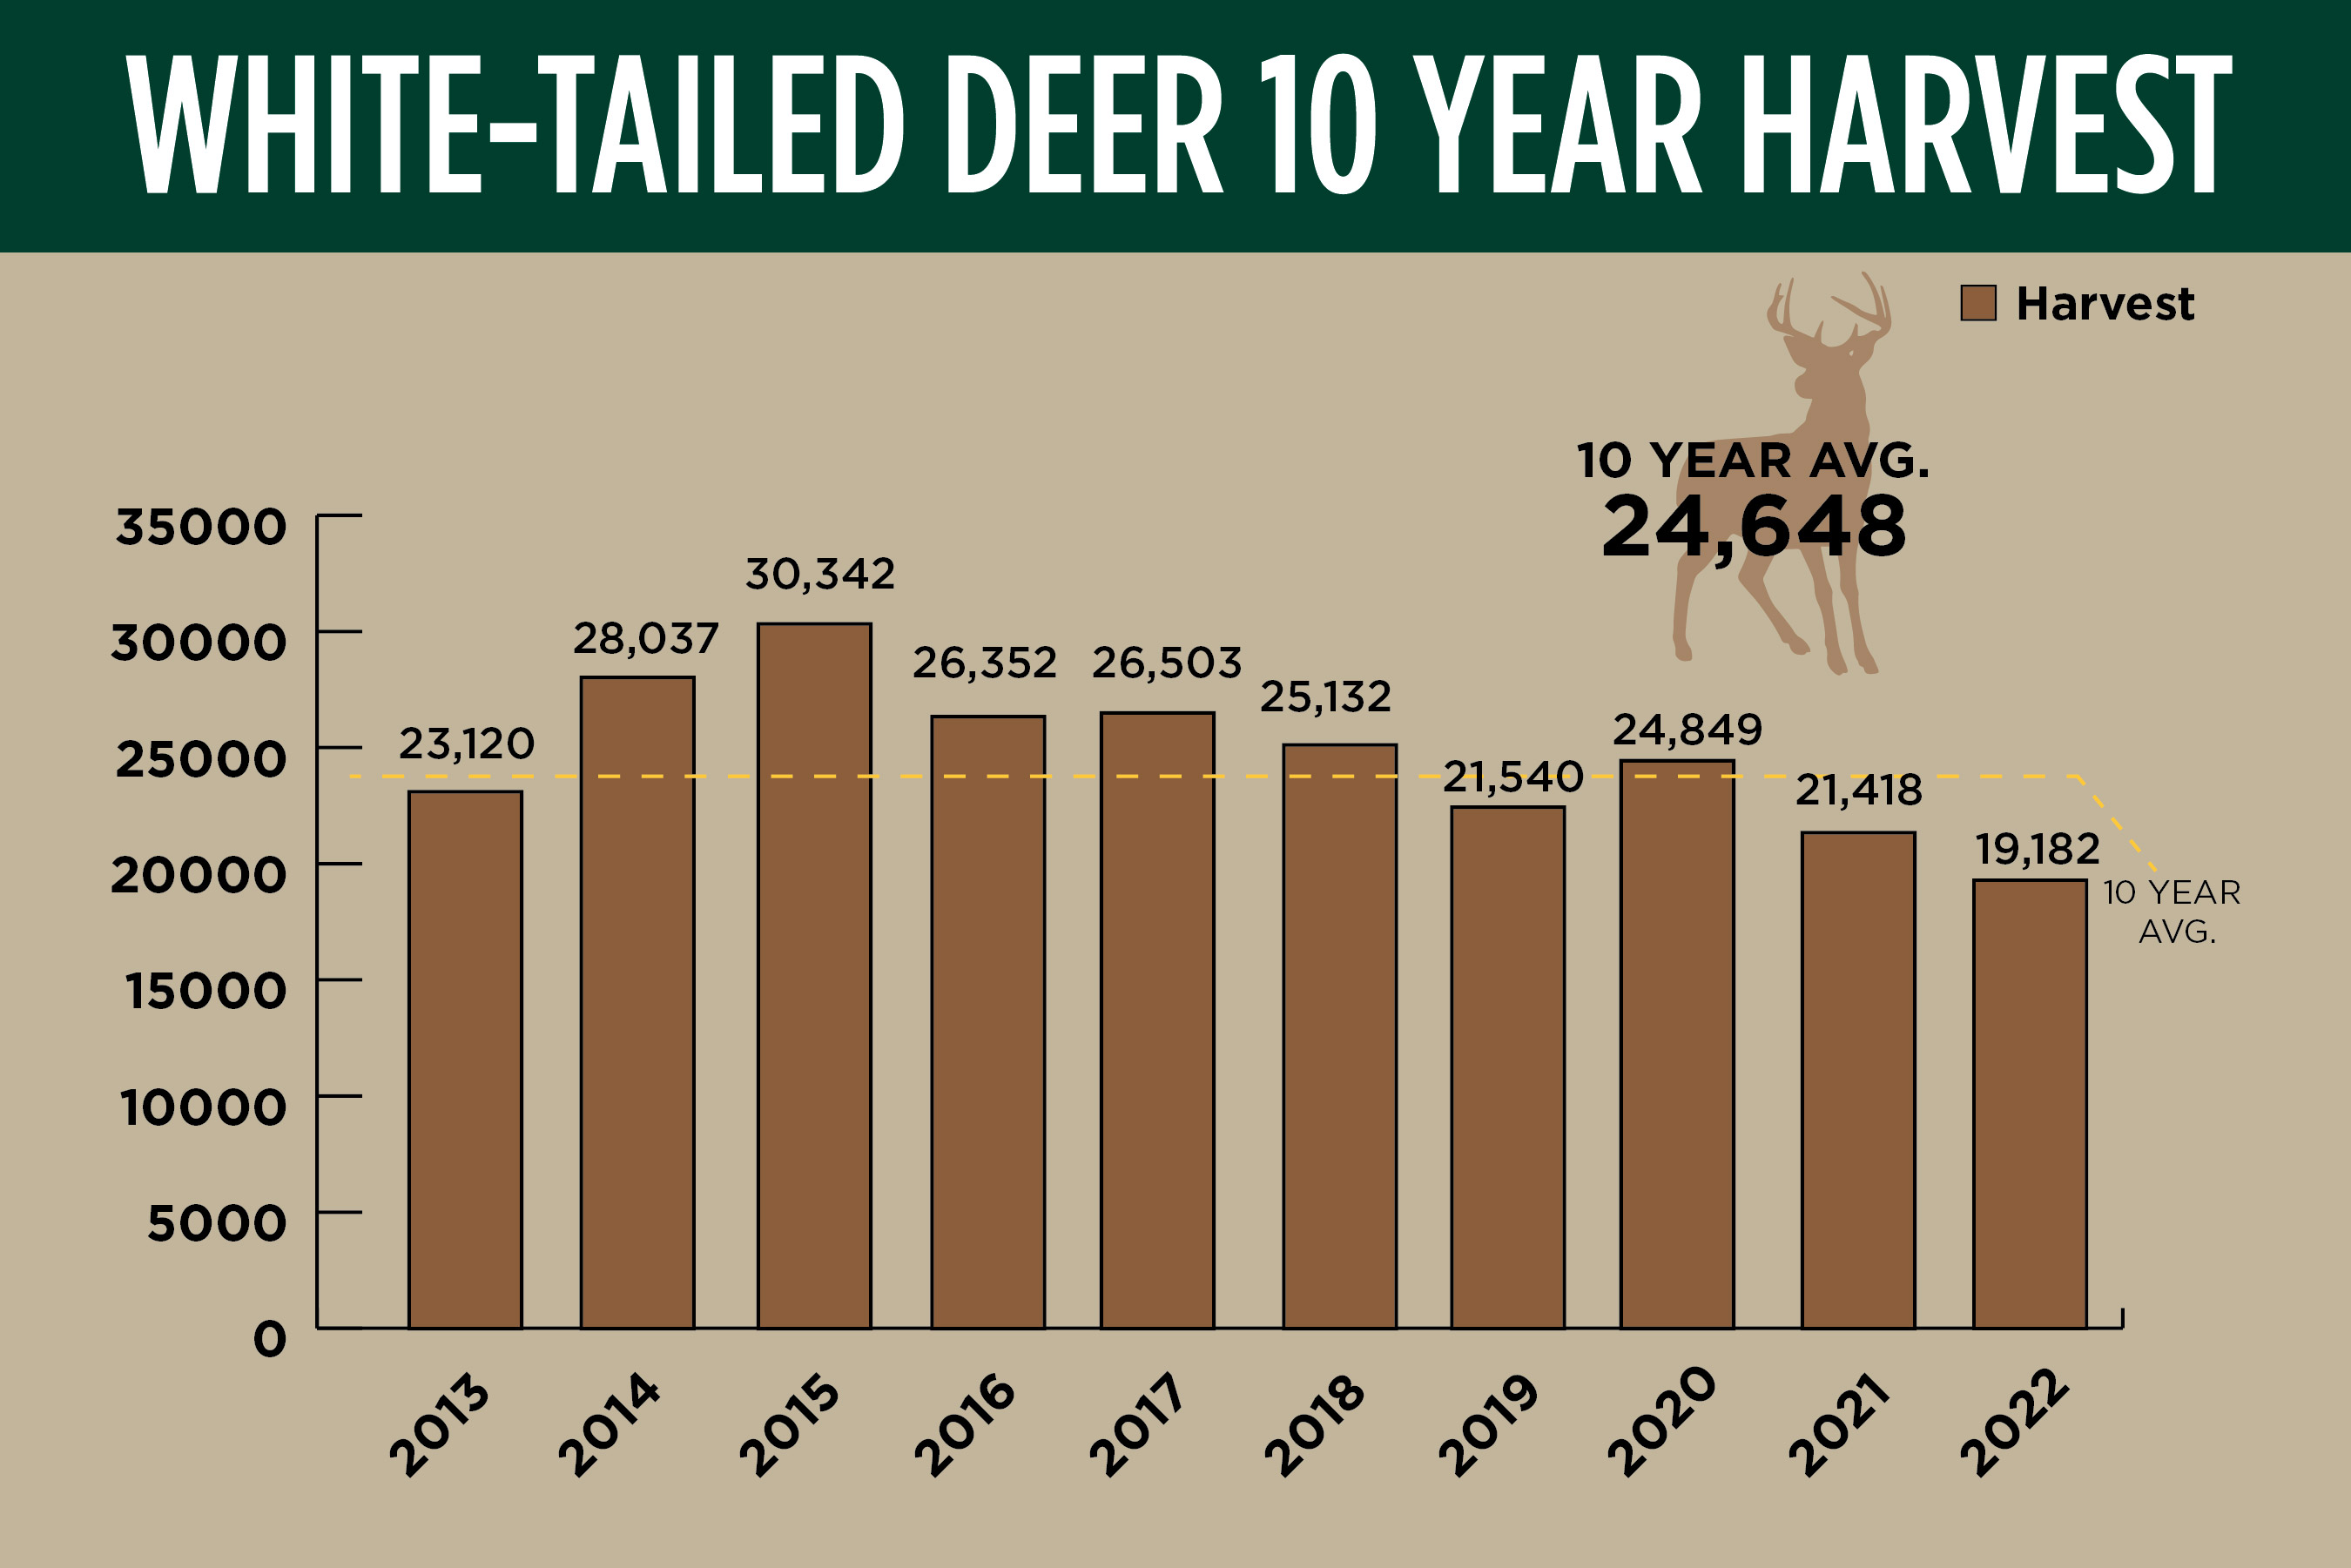 10-year white-tailed deer harvest